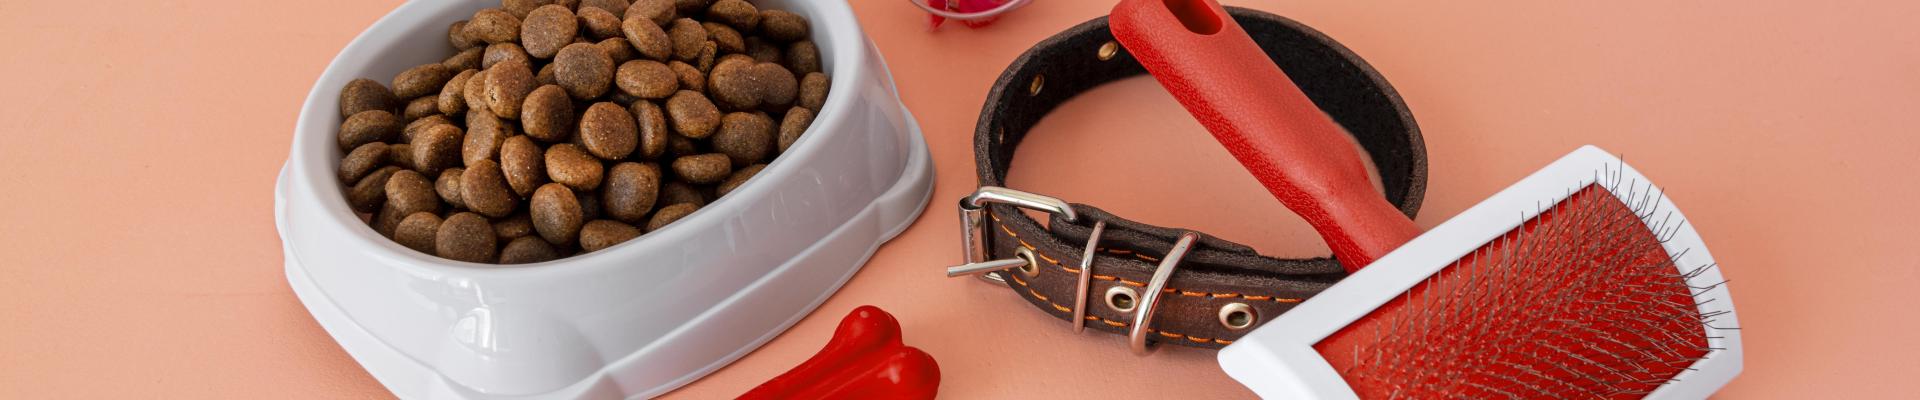 pet food and accessories